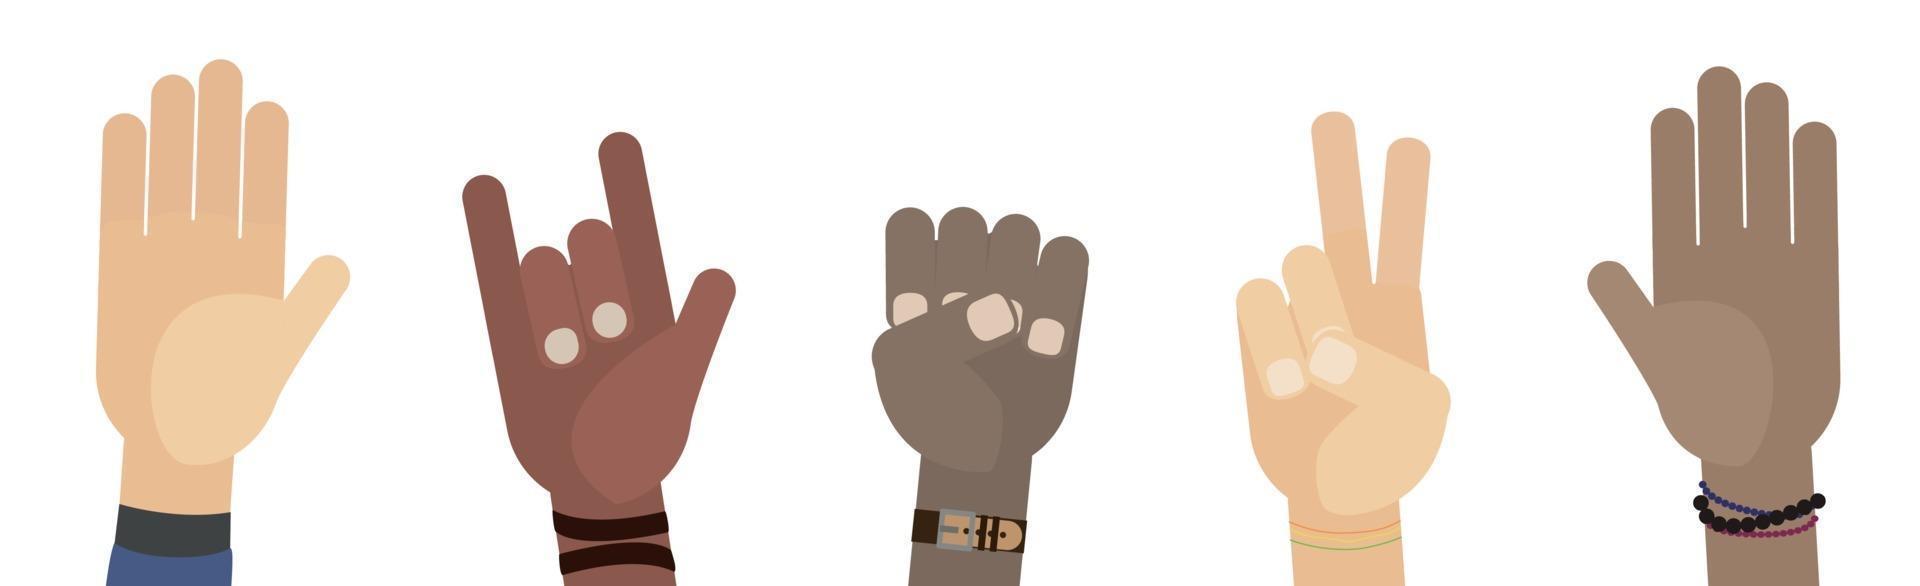 Hand gestures of people of different races - Vector